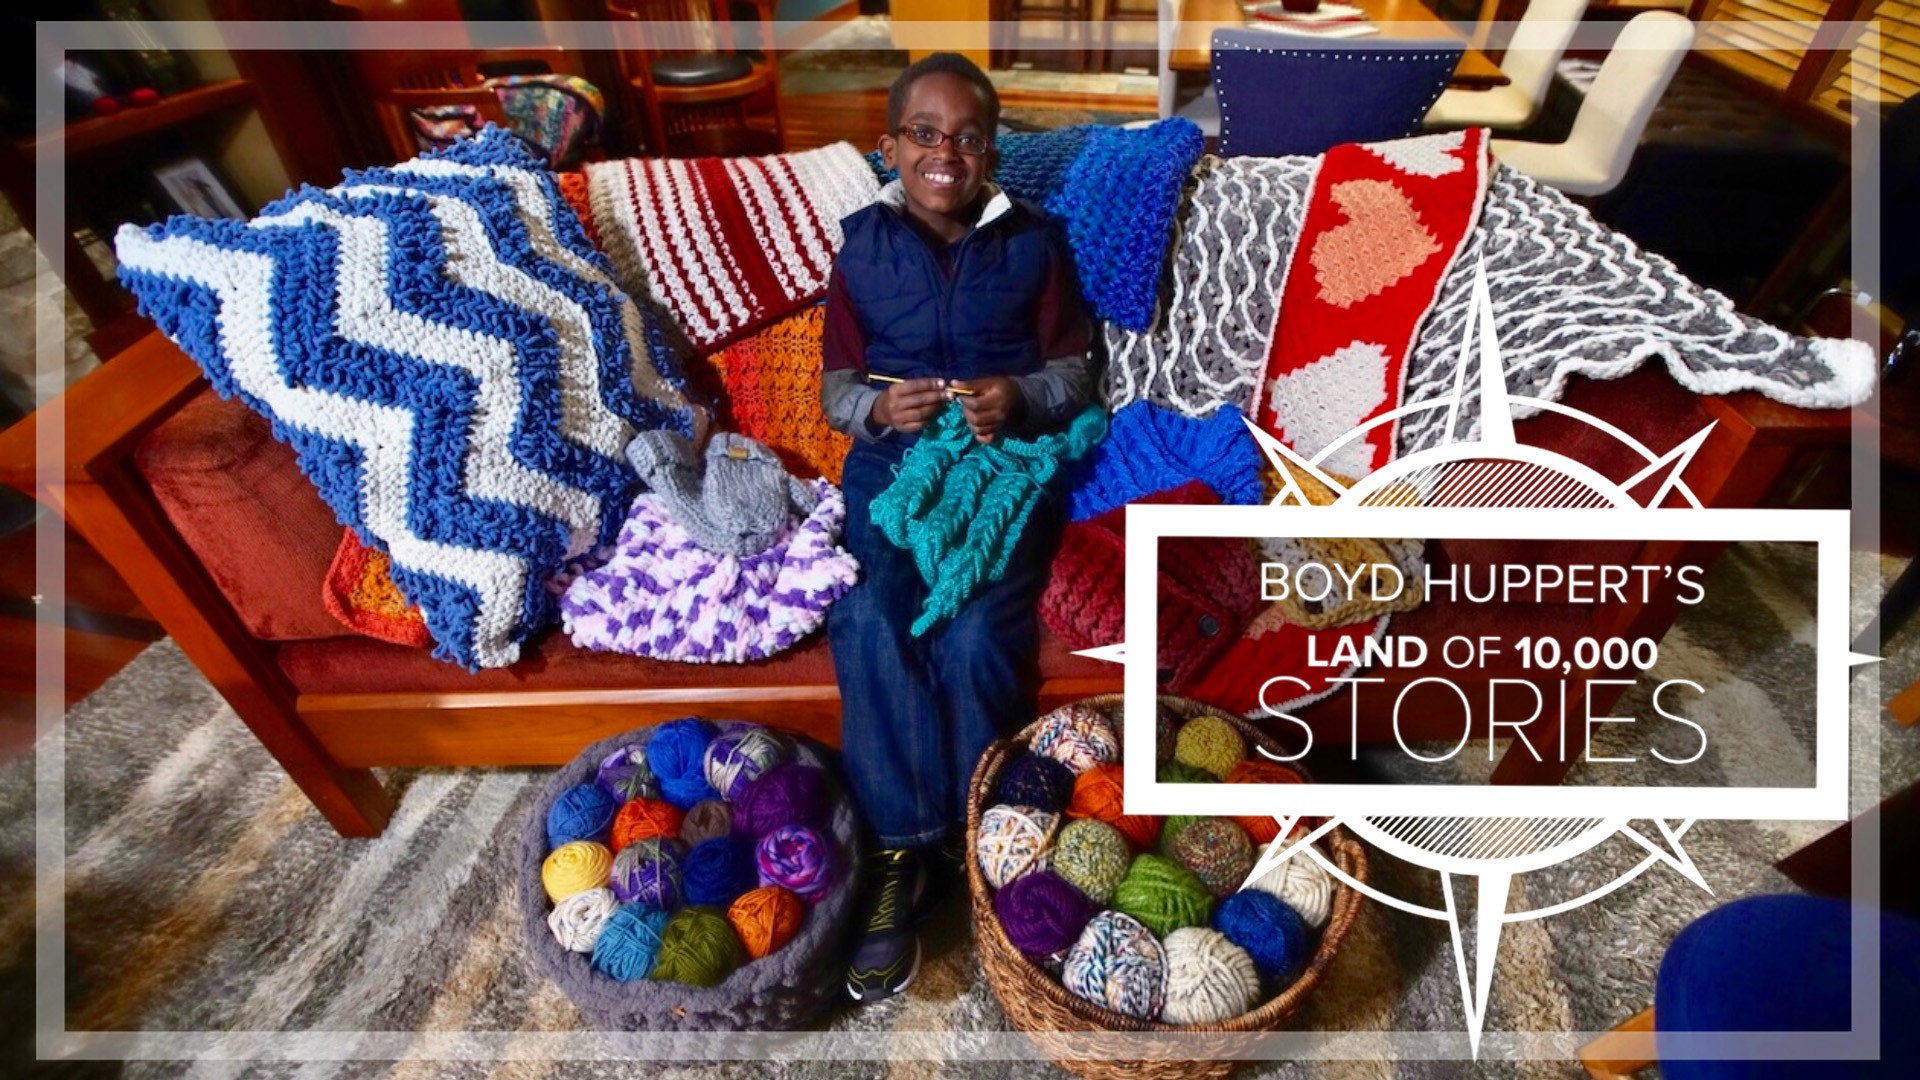 Jonah Larson uses proceeds from crocheting to make life better in his native Ethiopia.